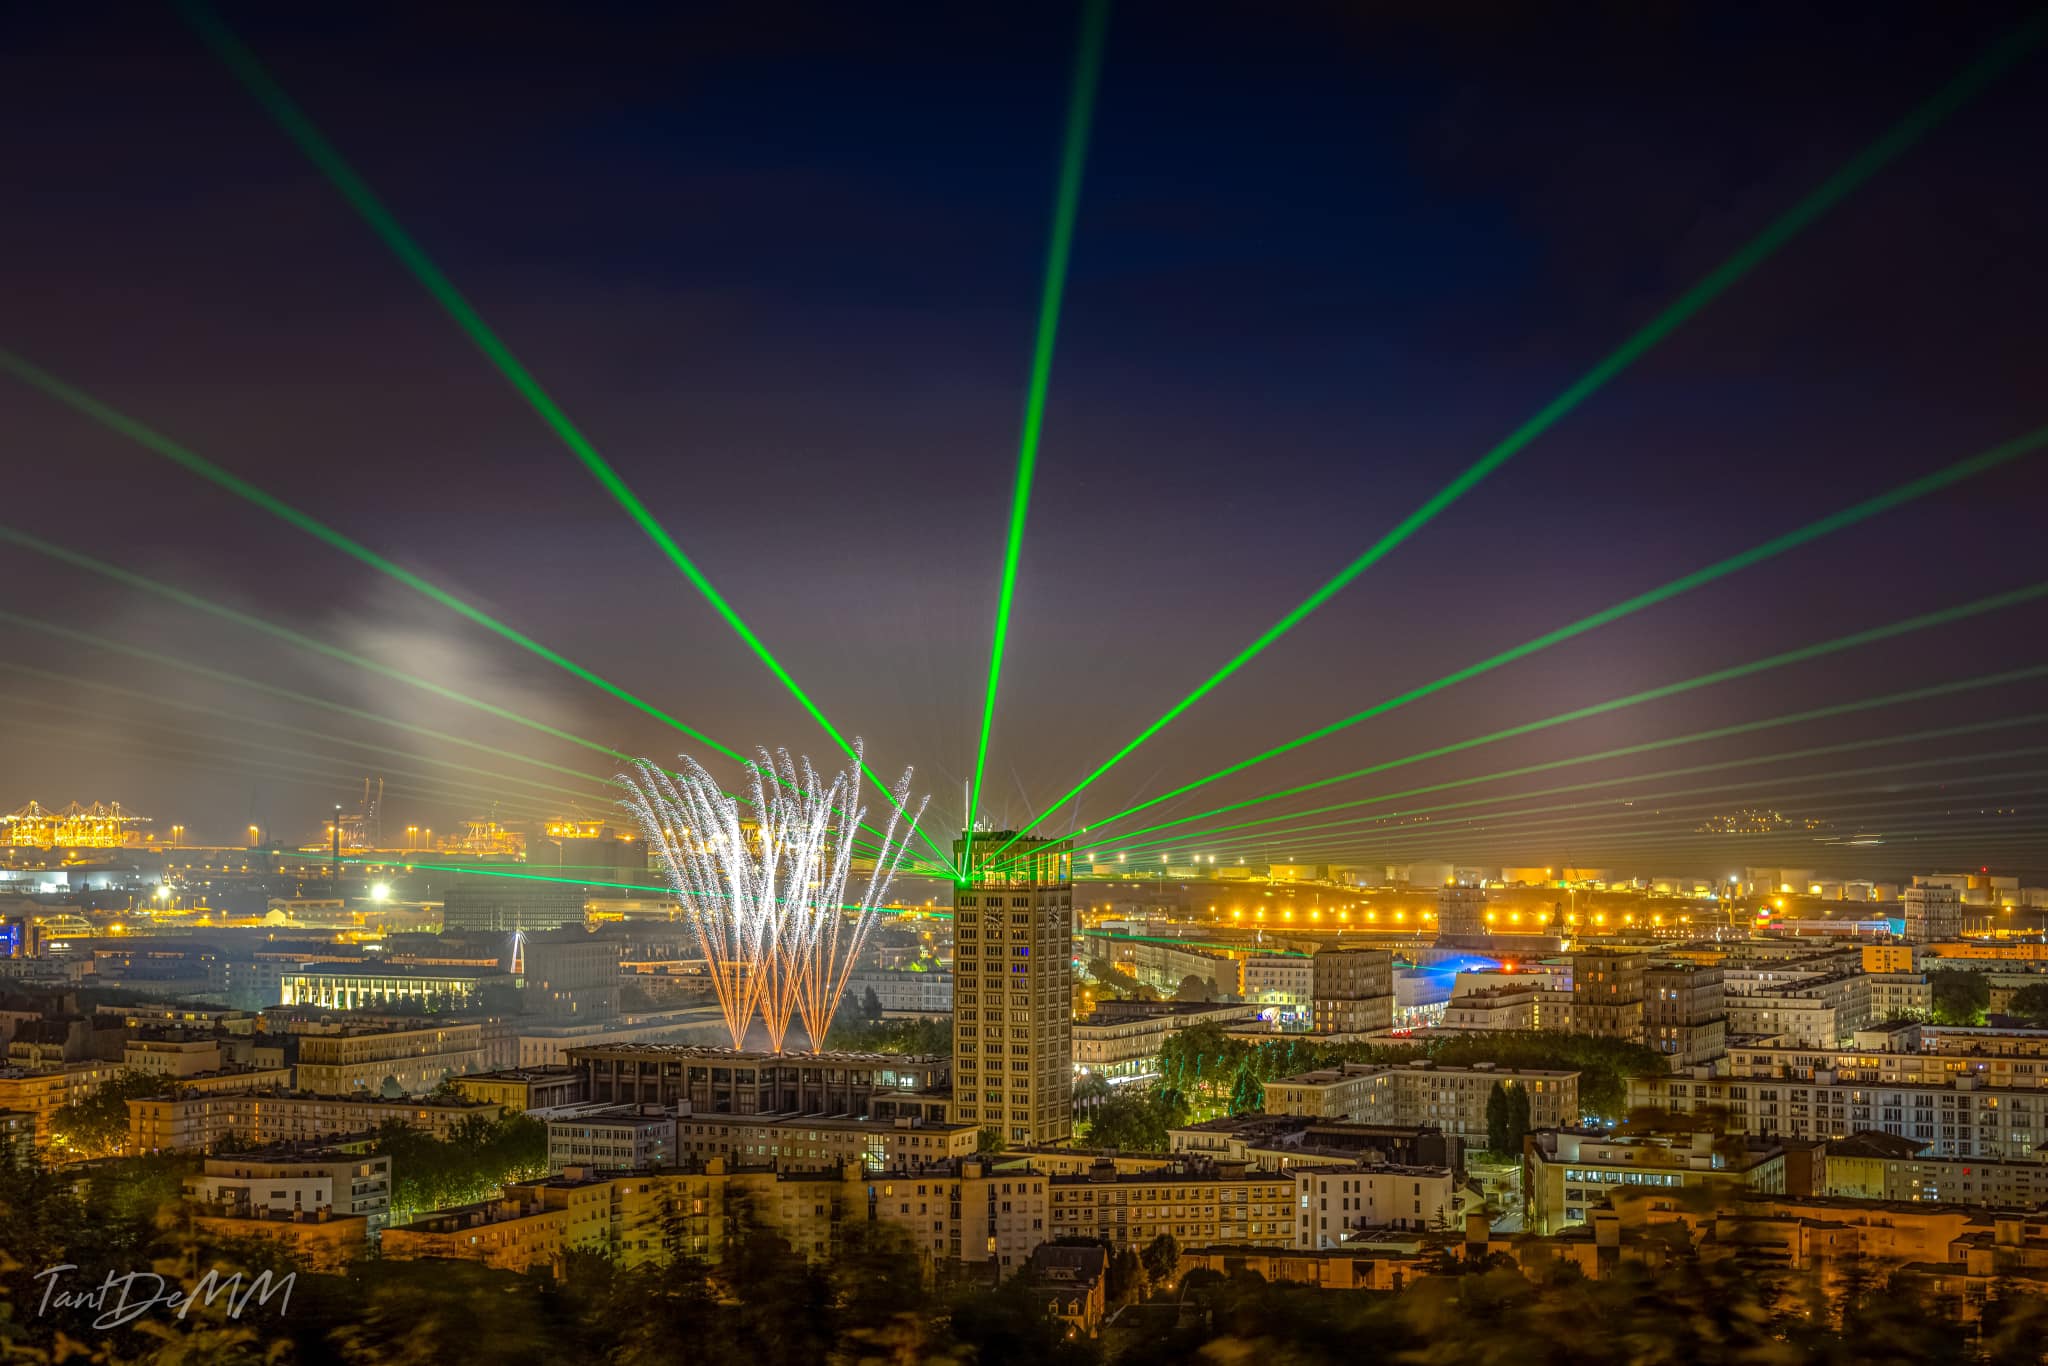 Europe Évènement - Photo of a town tower with green laser beams projection starting from the tower and accompanied by fireworks